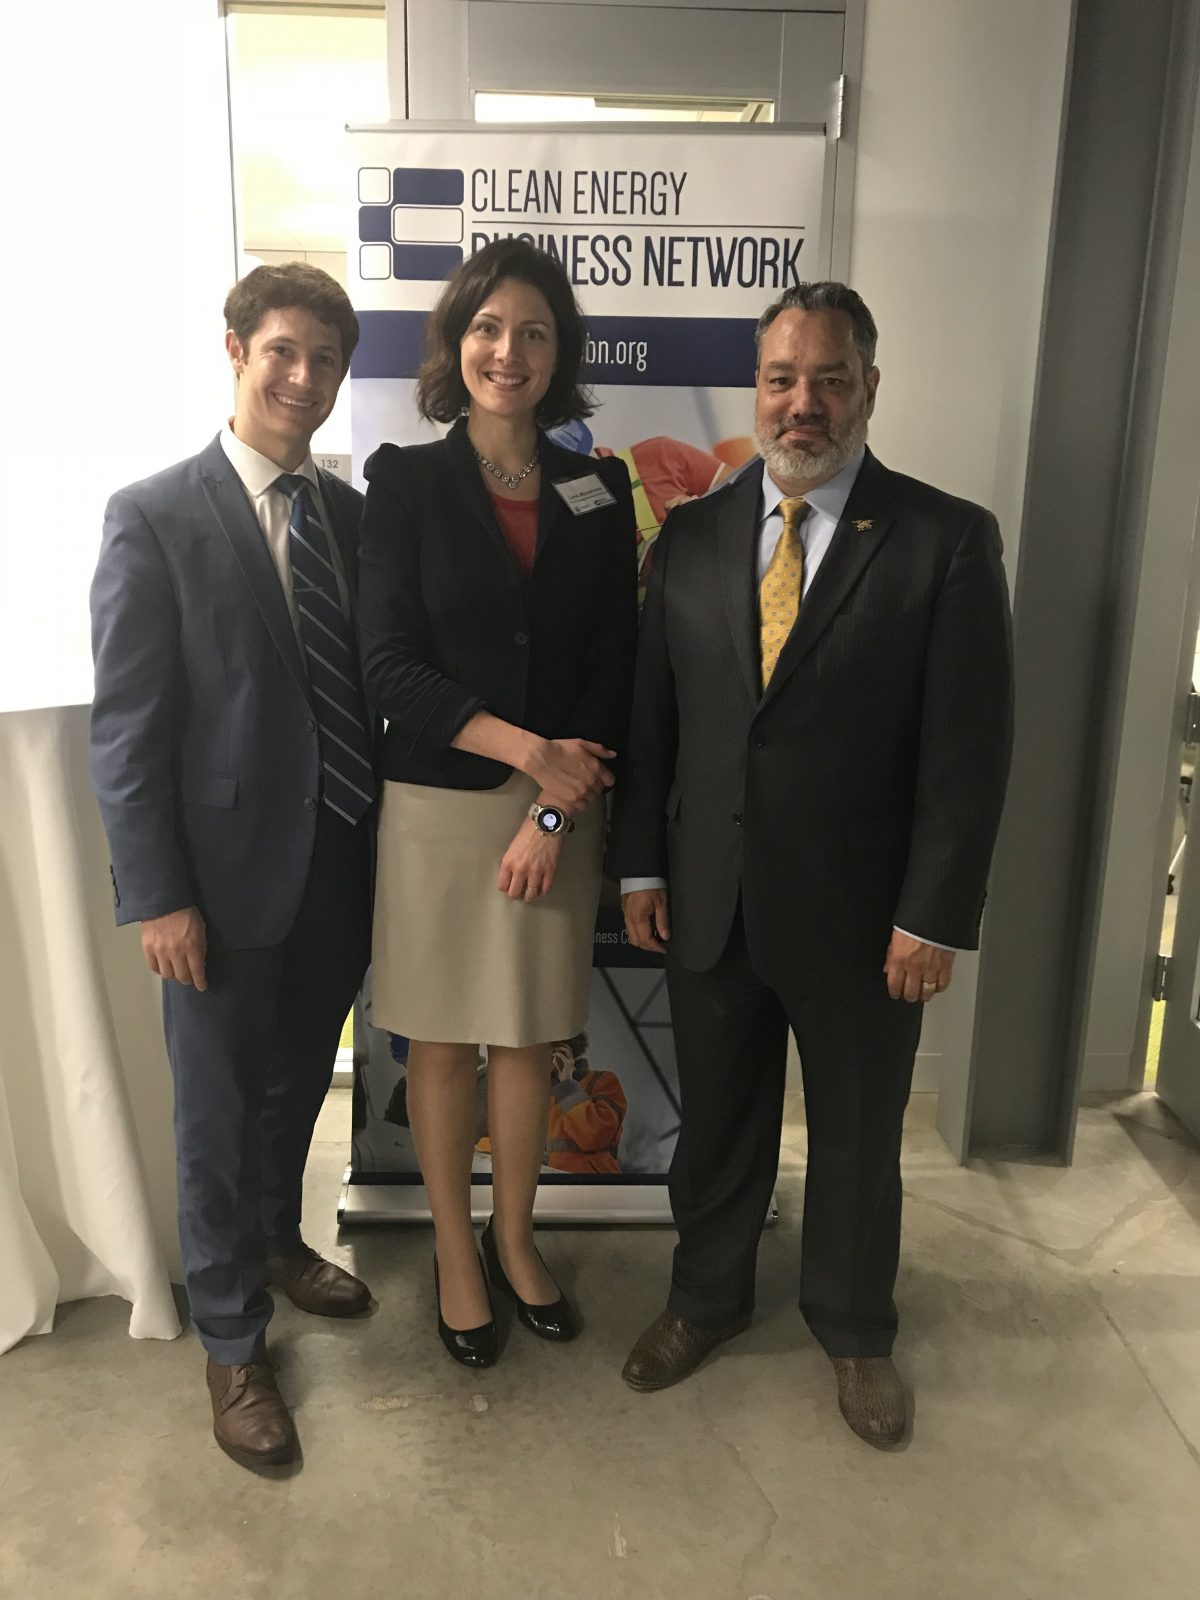 CEBN staff and leadership gather at the forum. L to R: Andy Barnes, Program Manager, CEBN; Lynn Abramson, President, CEBN; and James Jackson, Chairman of the Board, CEBN and Chief Business Development Officer, Thermal Energy Partners.